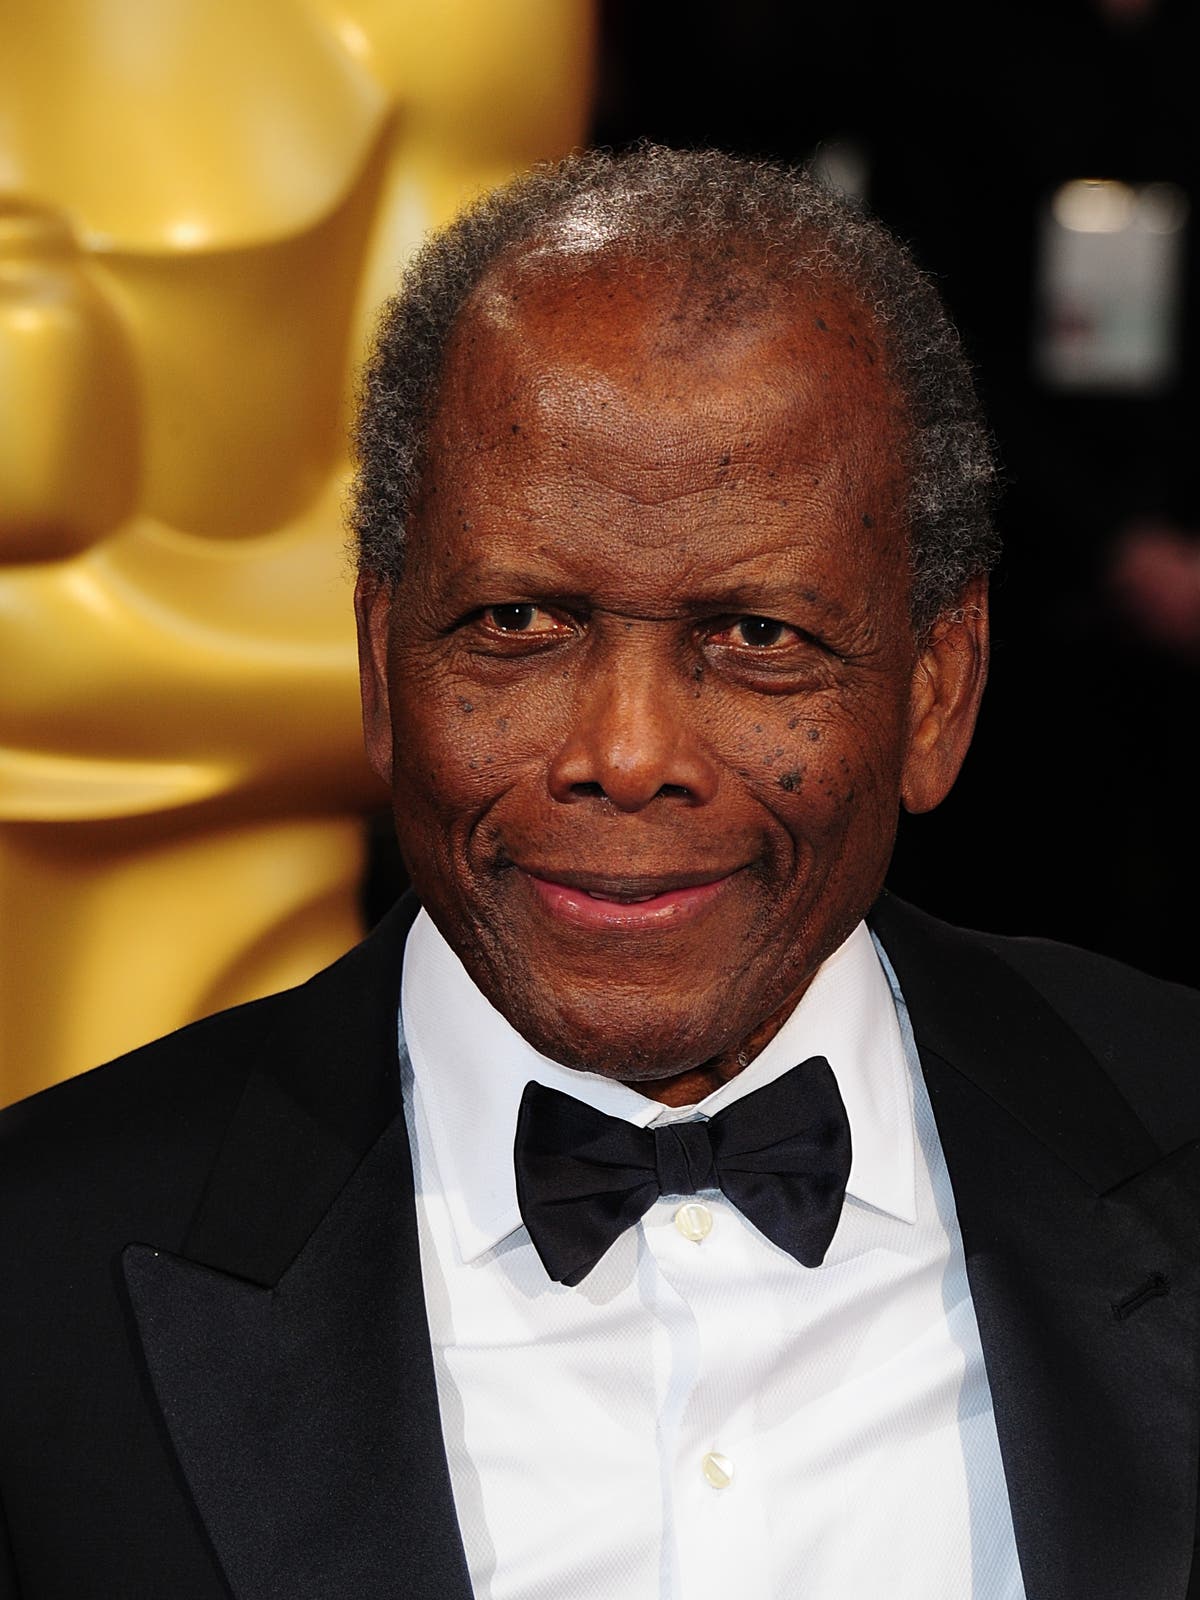 Biden and Harris join tributes to ‘once-in-a-generation’ actor Sidney Poitier